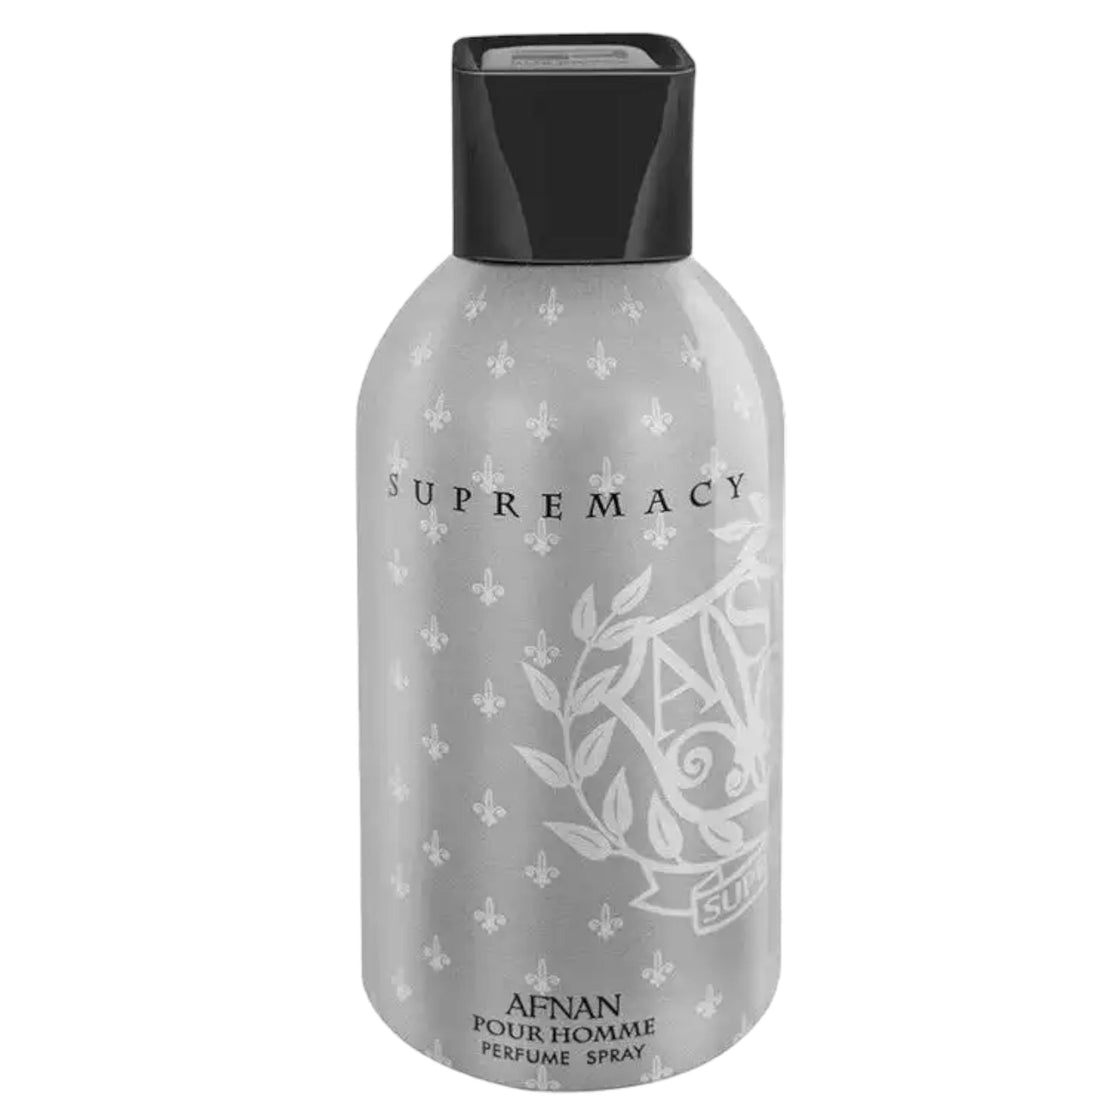 Afnan Supremacy Deodorant 250ml bottle showcased with emphasis on its masculine and elegant design.